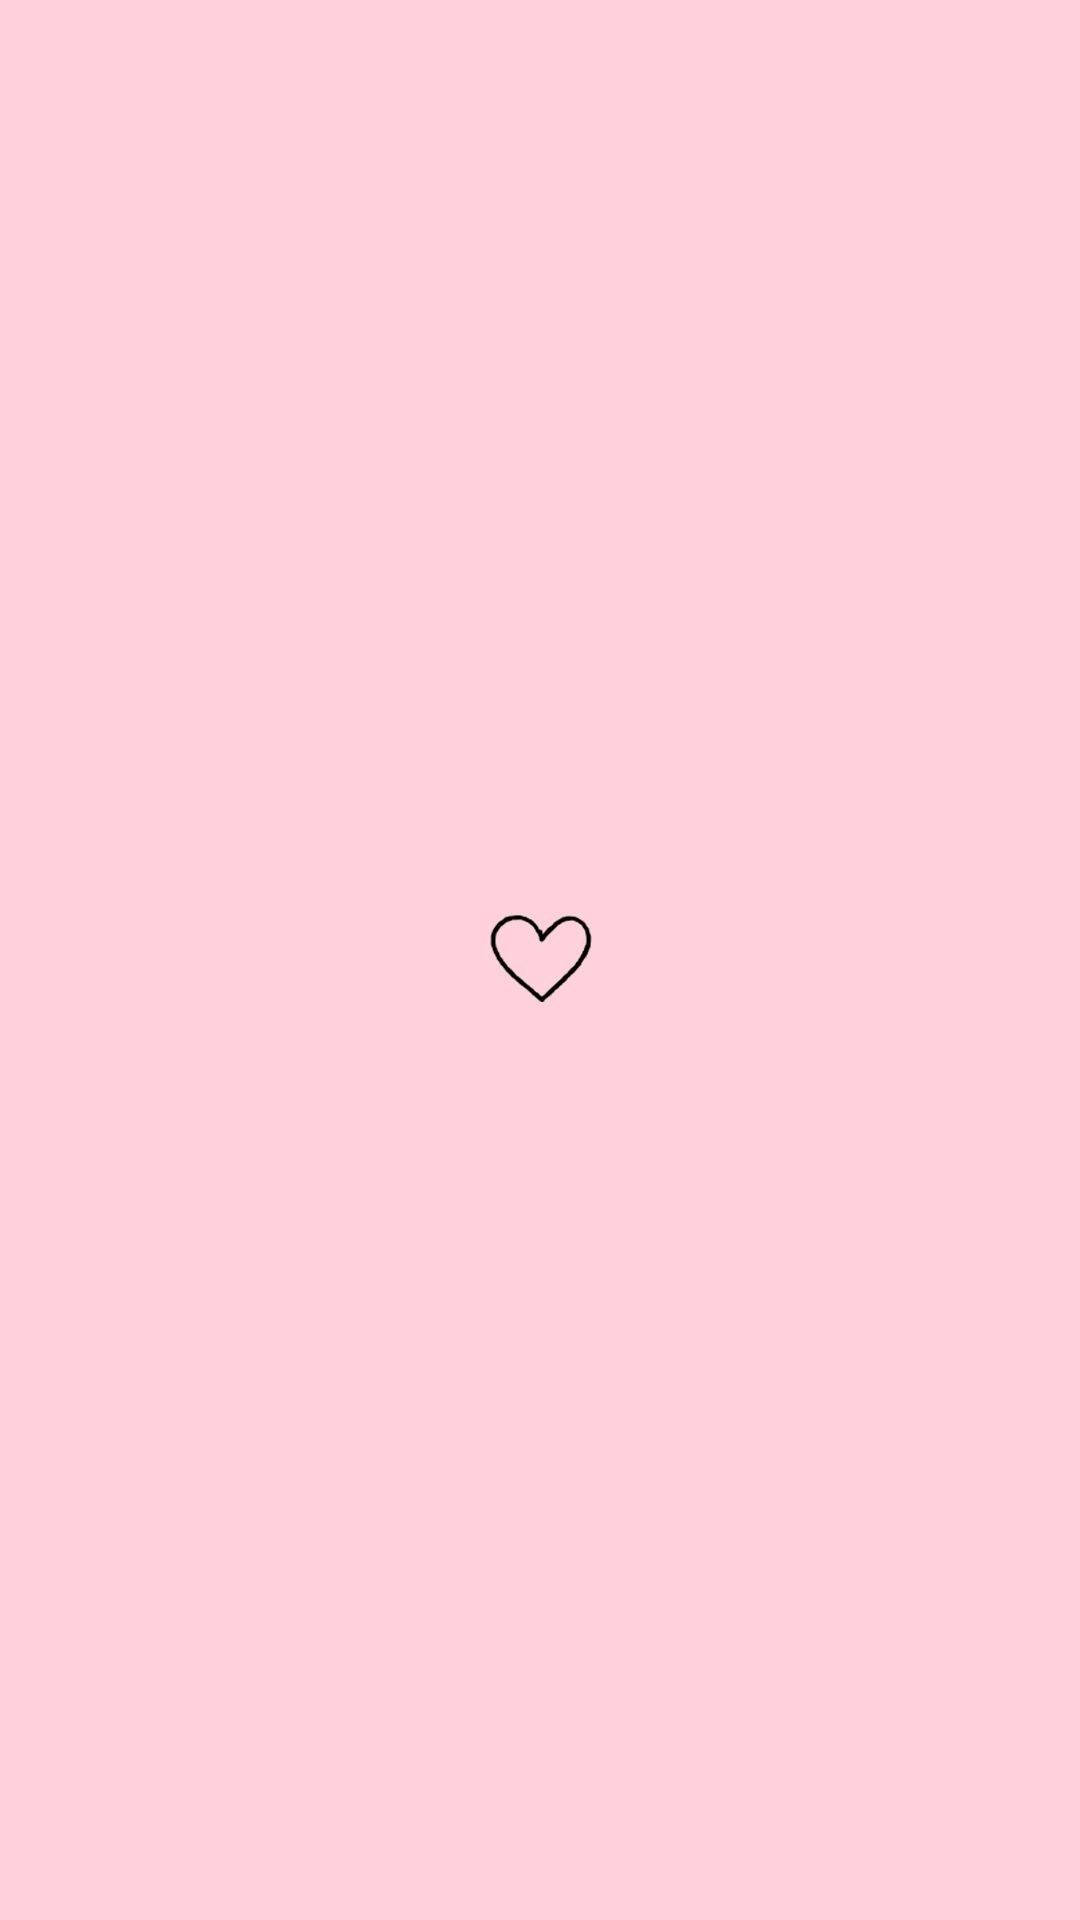 Cute Instagram Background With Heart